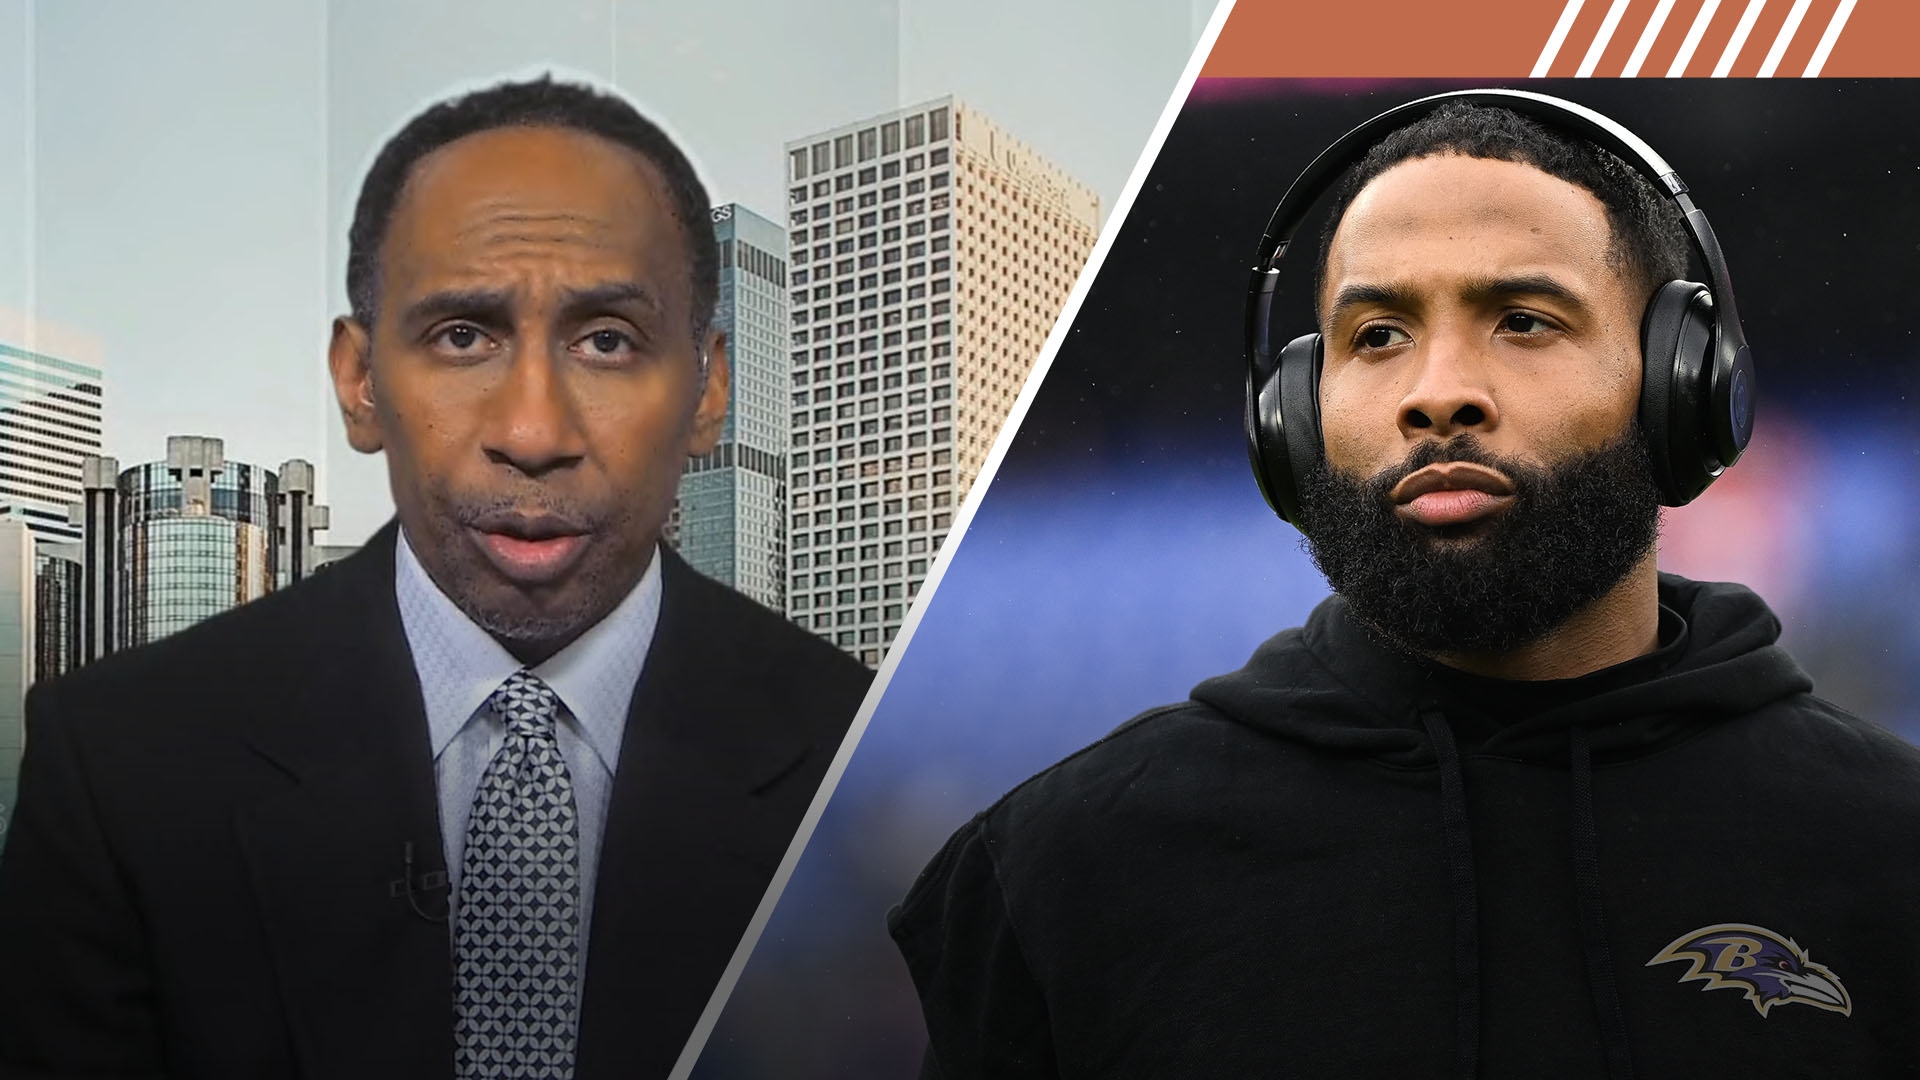 Stephen A. happy for OBJ landing with the Dolphins